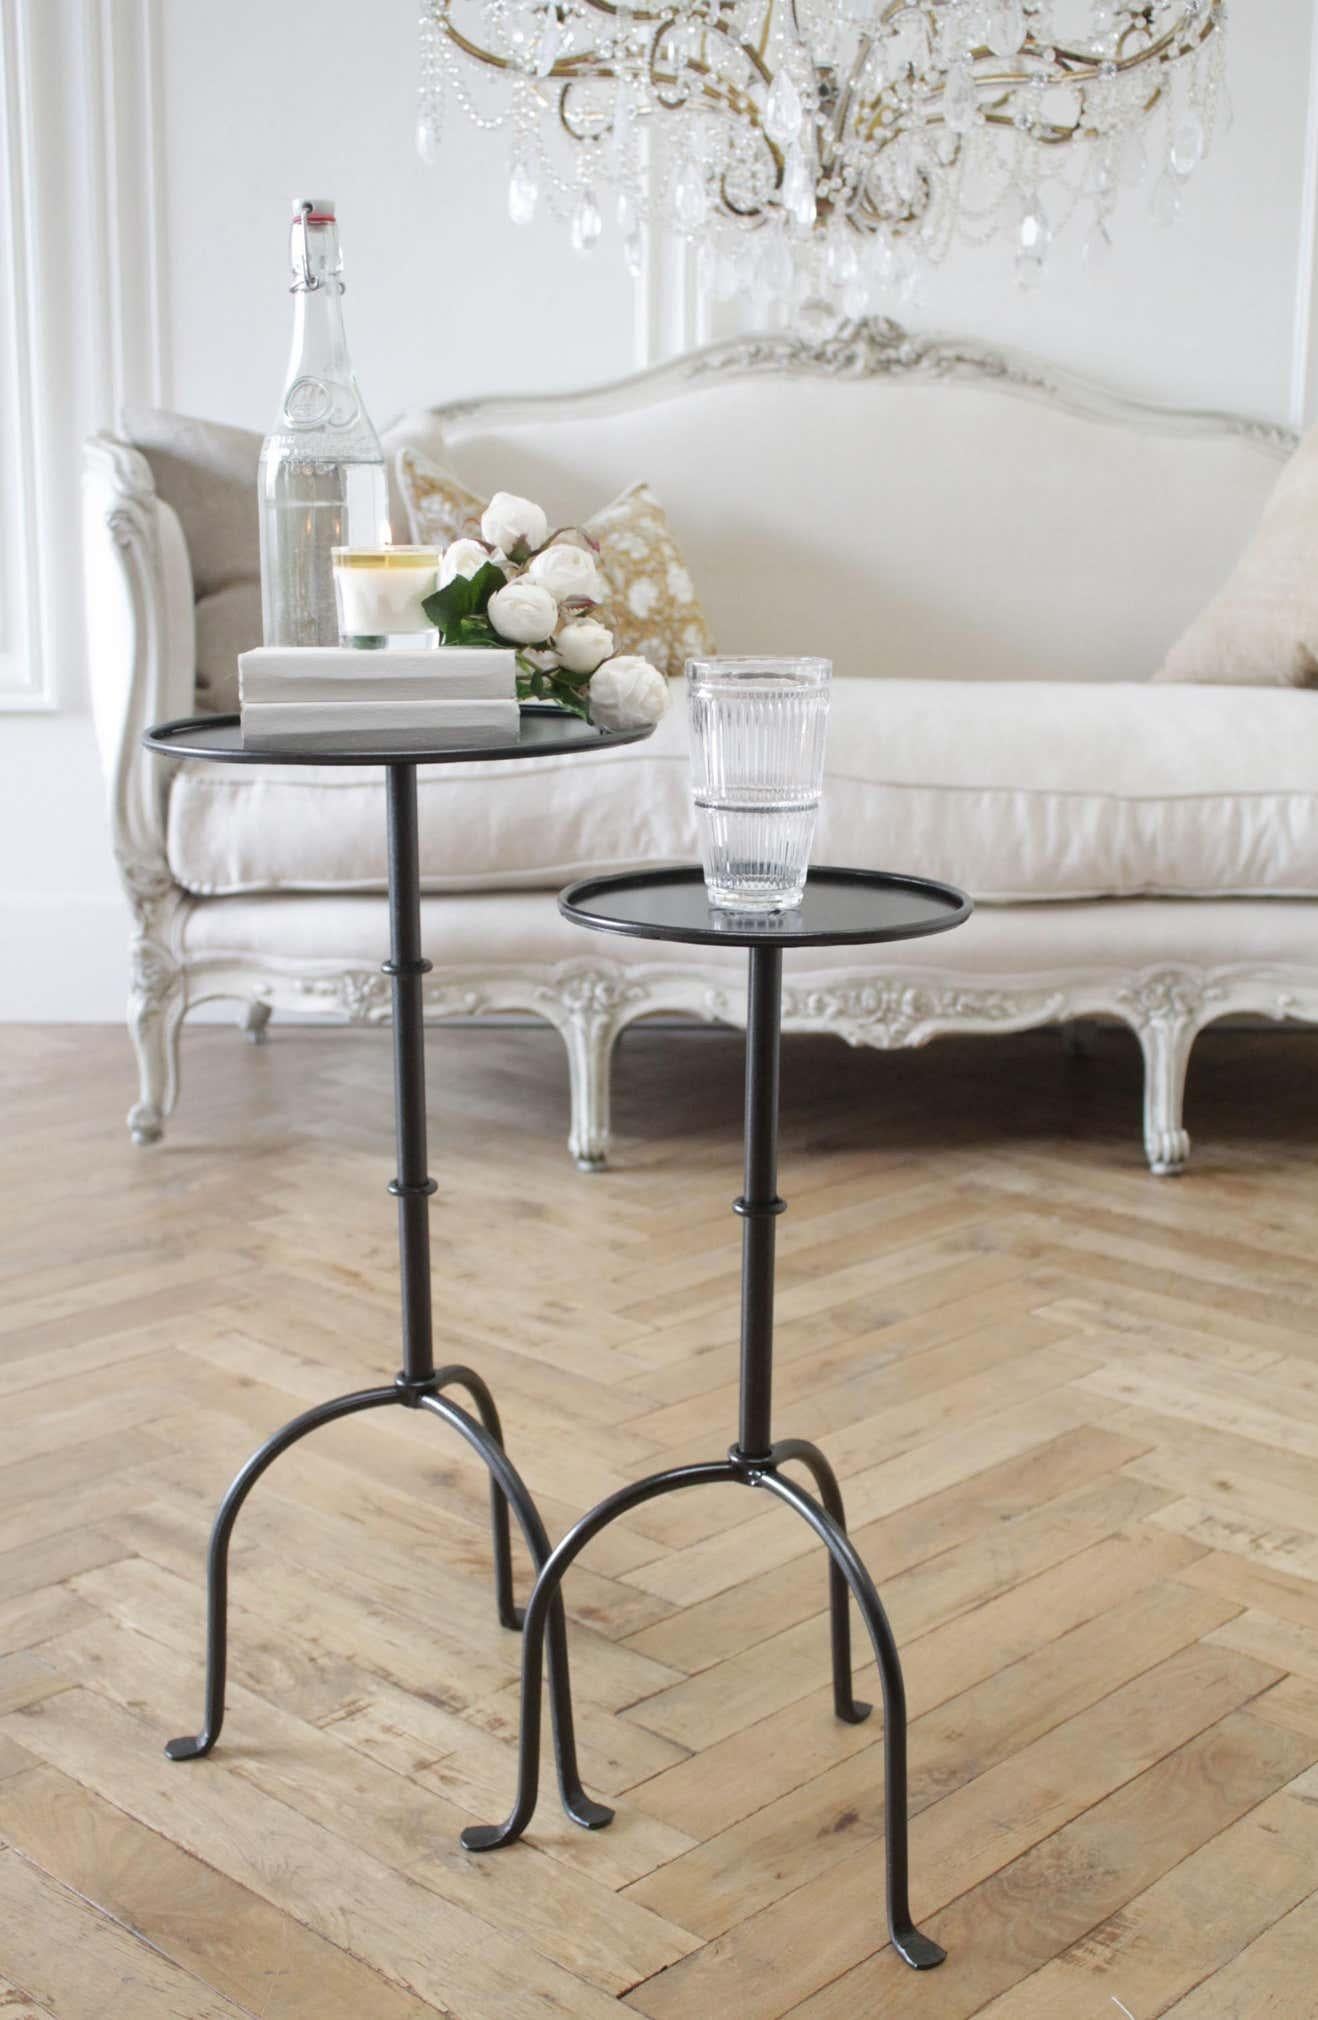 American Cannes French Inspired Small Iron Drink Table in Iron Finish